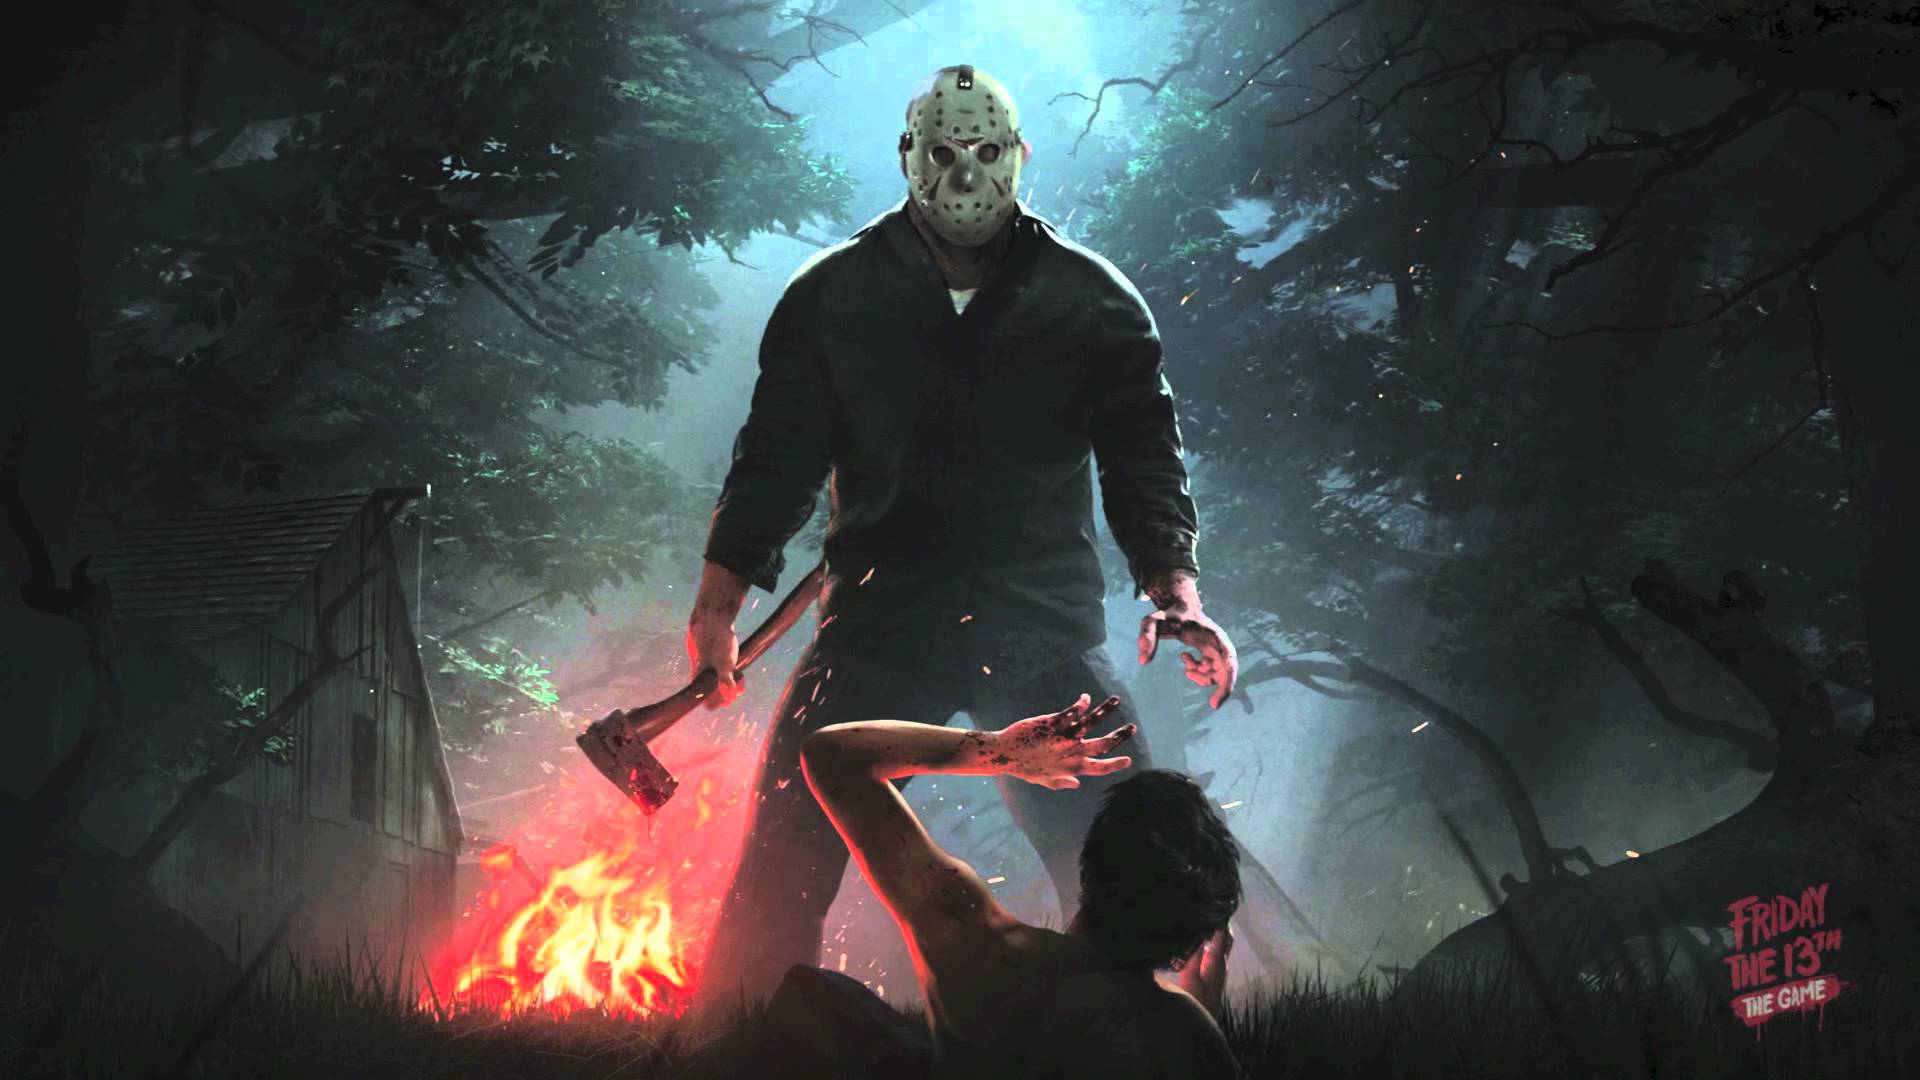 Friday The 13th fever horror game just released 1 day has been cracked, the developer must ask everyone to buy the game